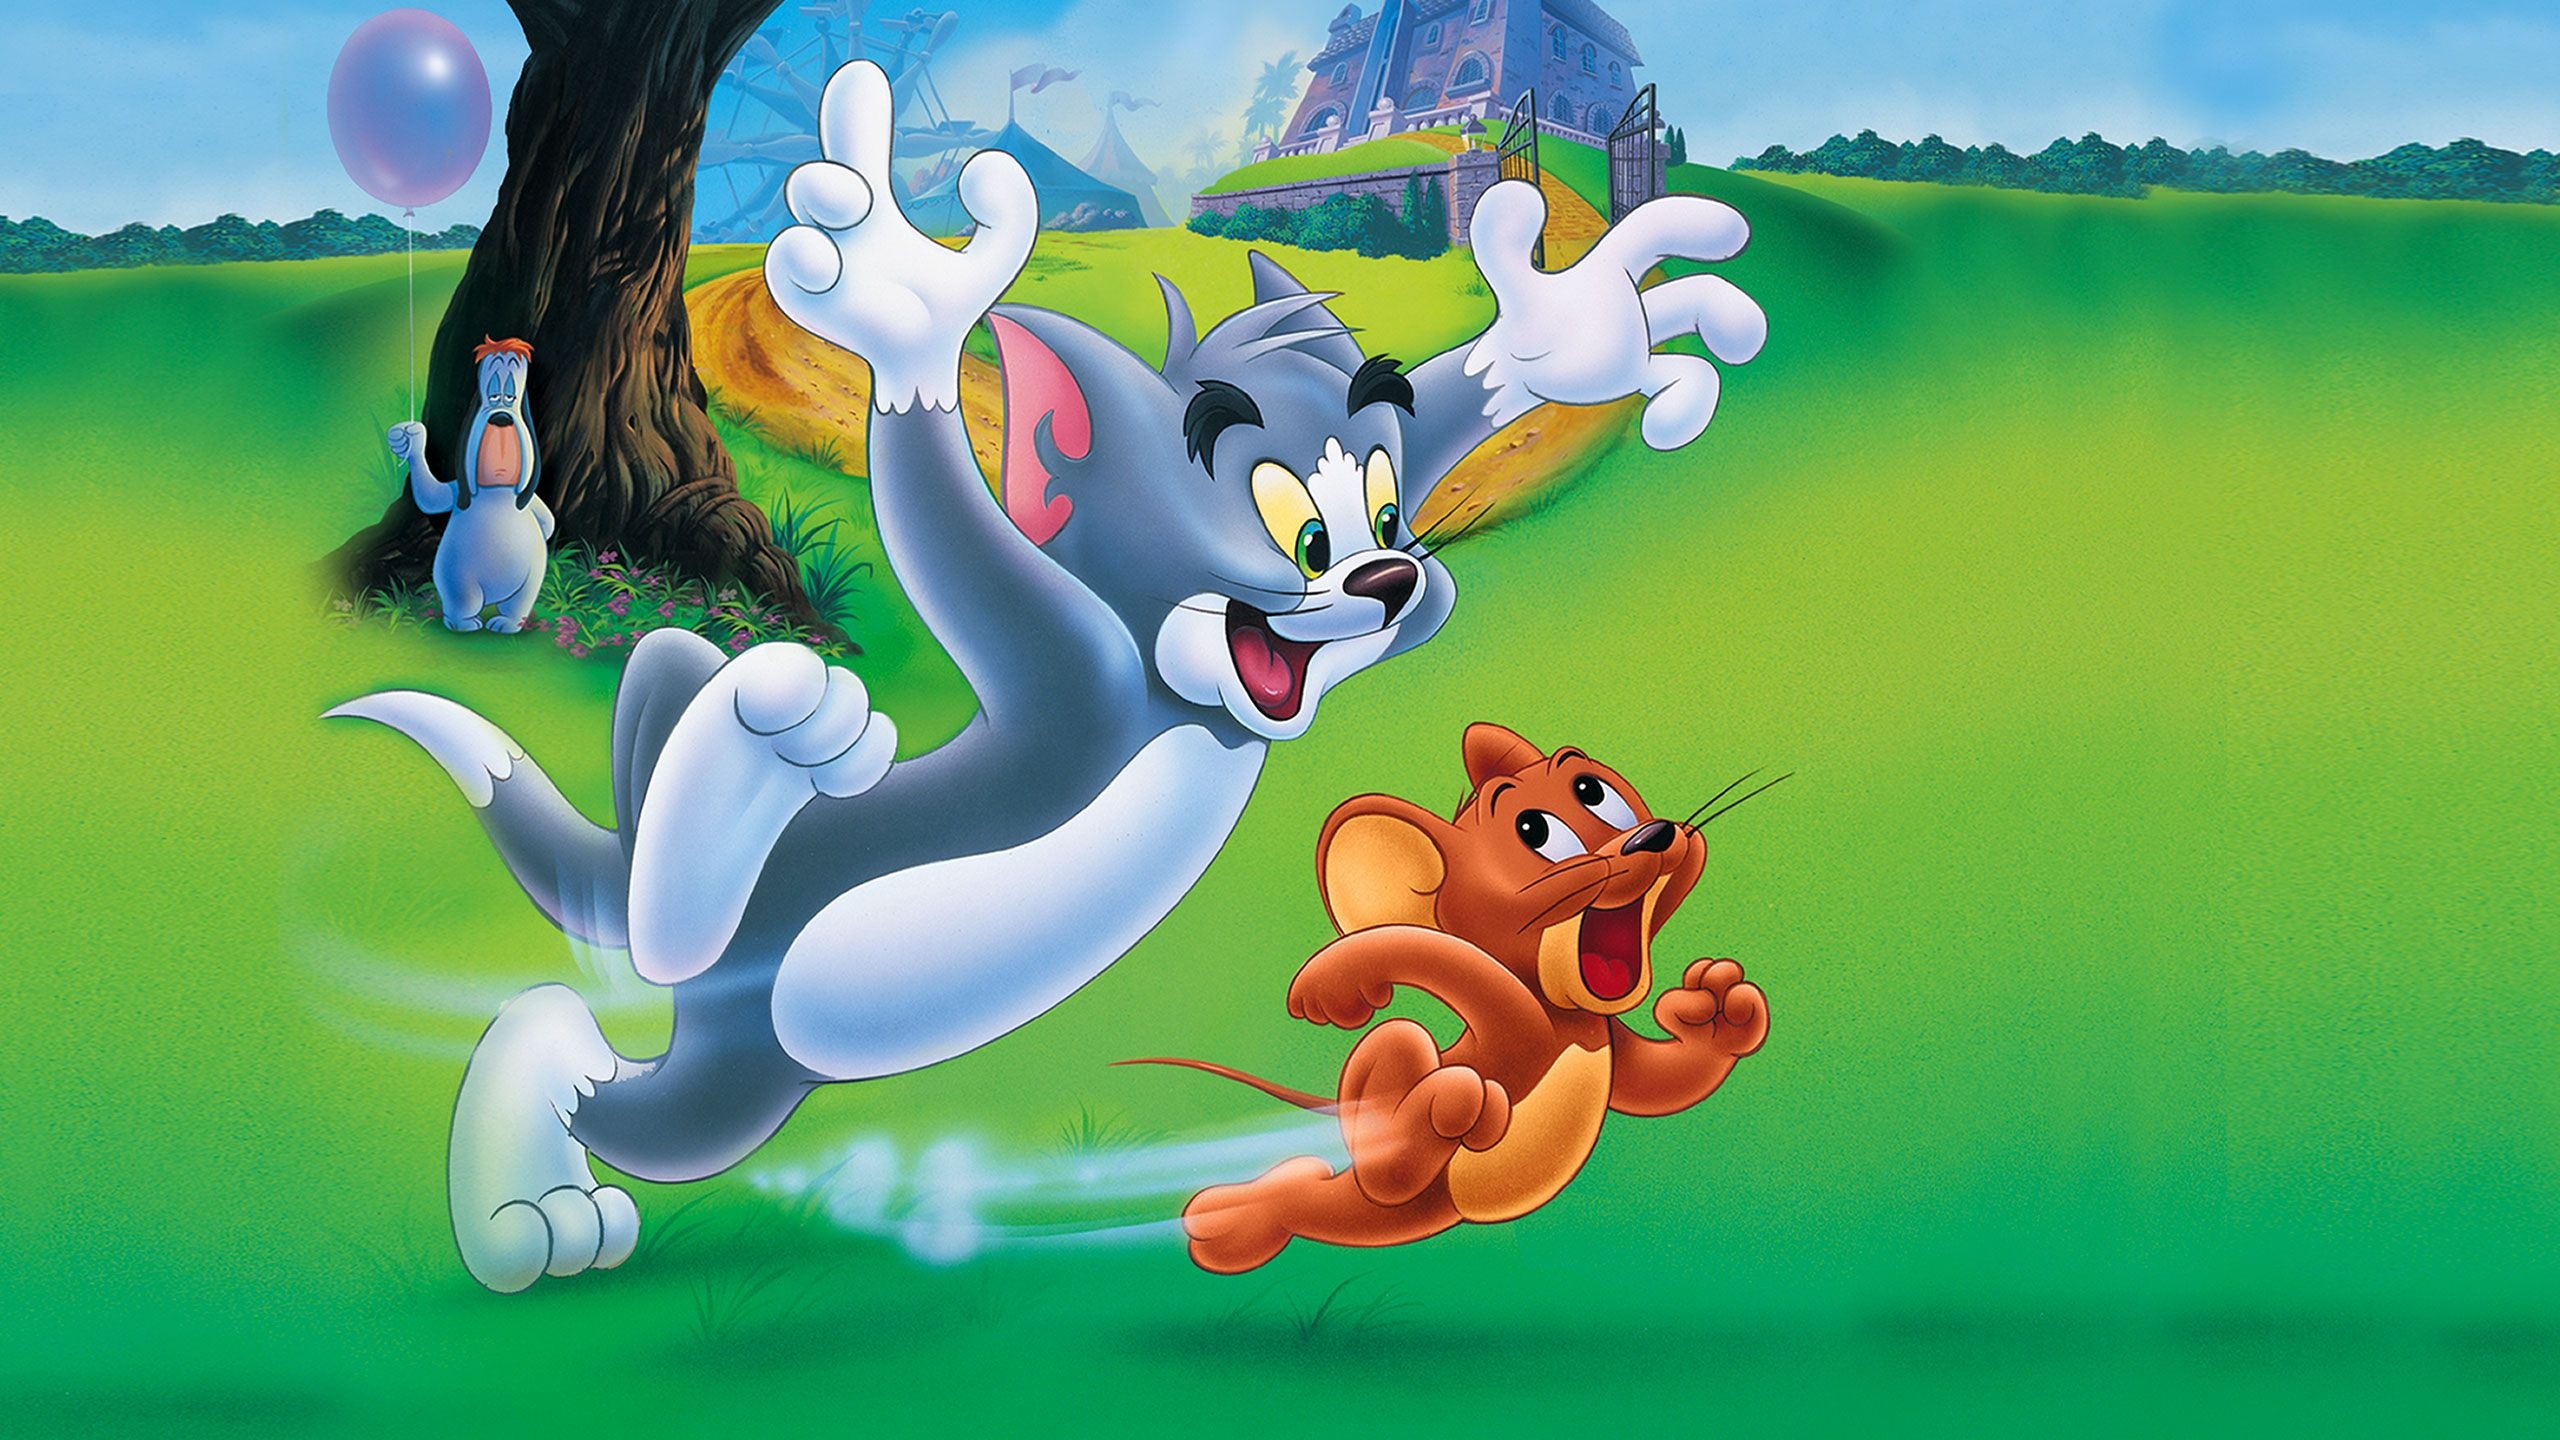 Tom and Jerry, Animated classic, Iconic duo, Memorable moments, 2560x1440 HD Desktop